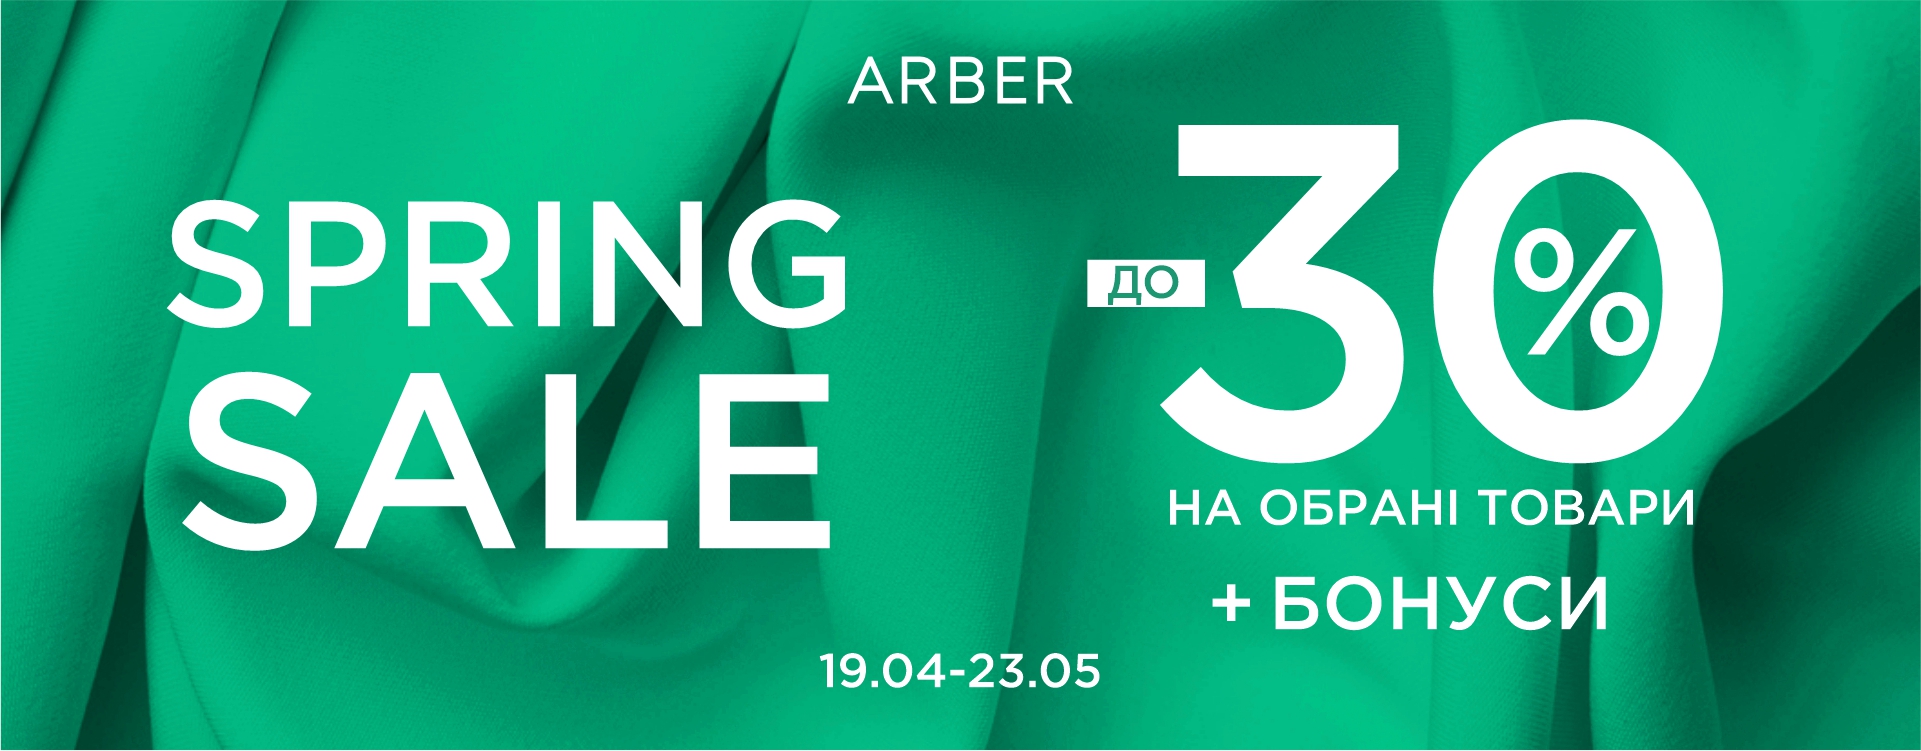 Spring SALE in ARBER with a discount of up to -30%